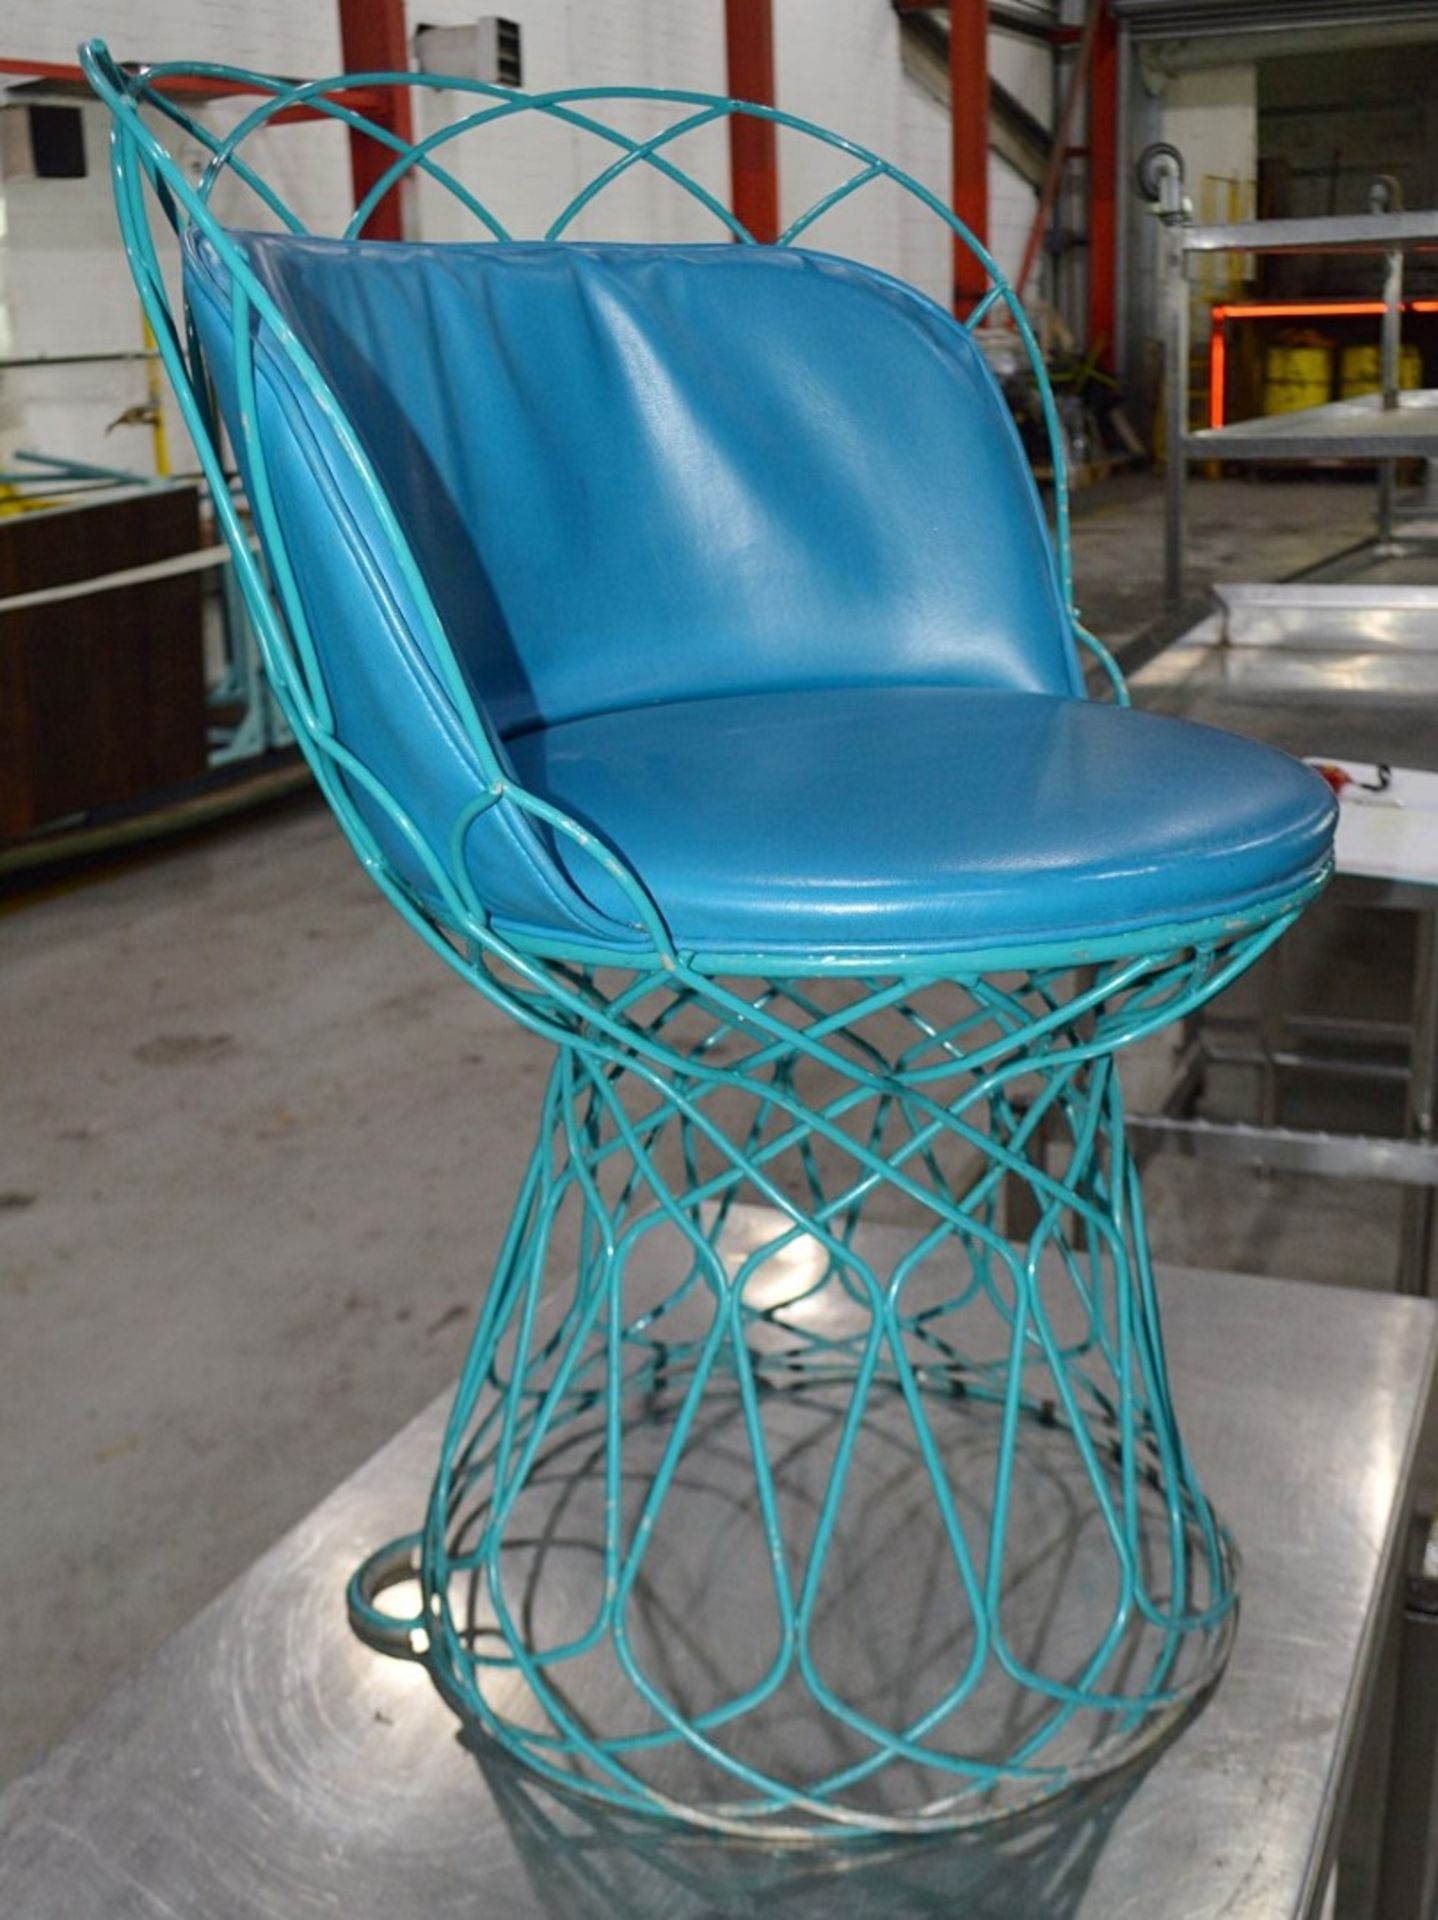 2 x Commercial Outdoor Wire Bistro Chairs With Padded Seats In Blue - Dimensions: H80 x W62 x D45cm - Image 5 of 7